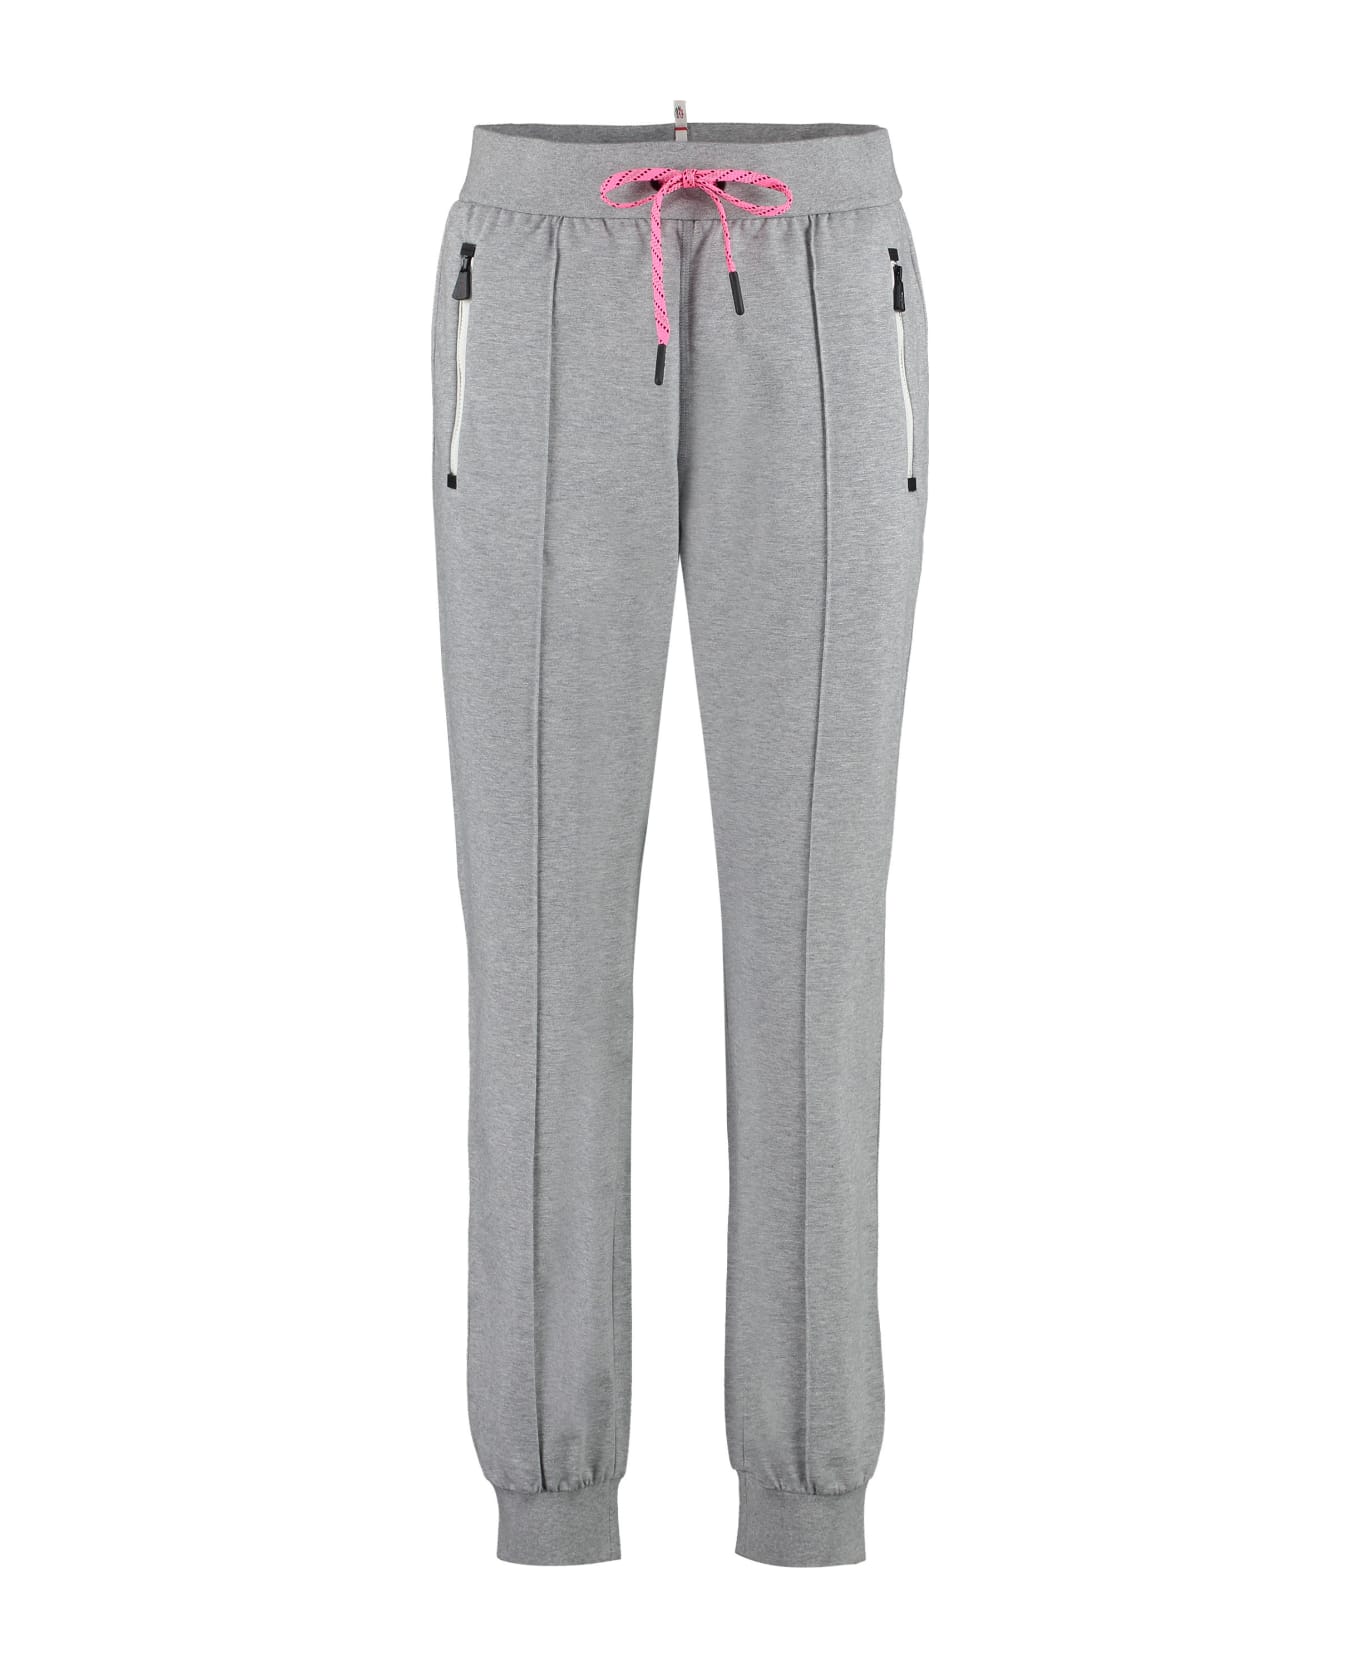 Moncler Grenoble Grey Track Pants With Logo - Grey ボトムス